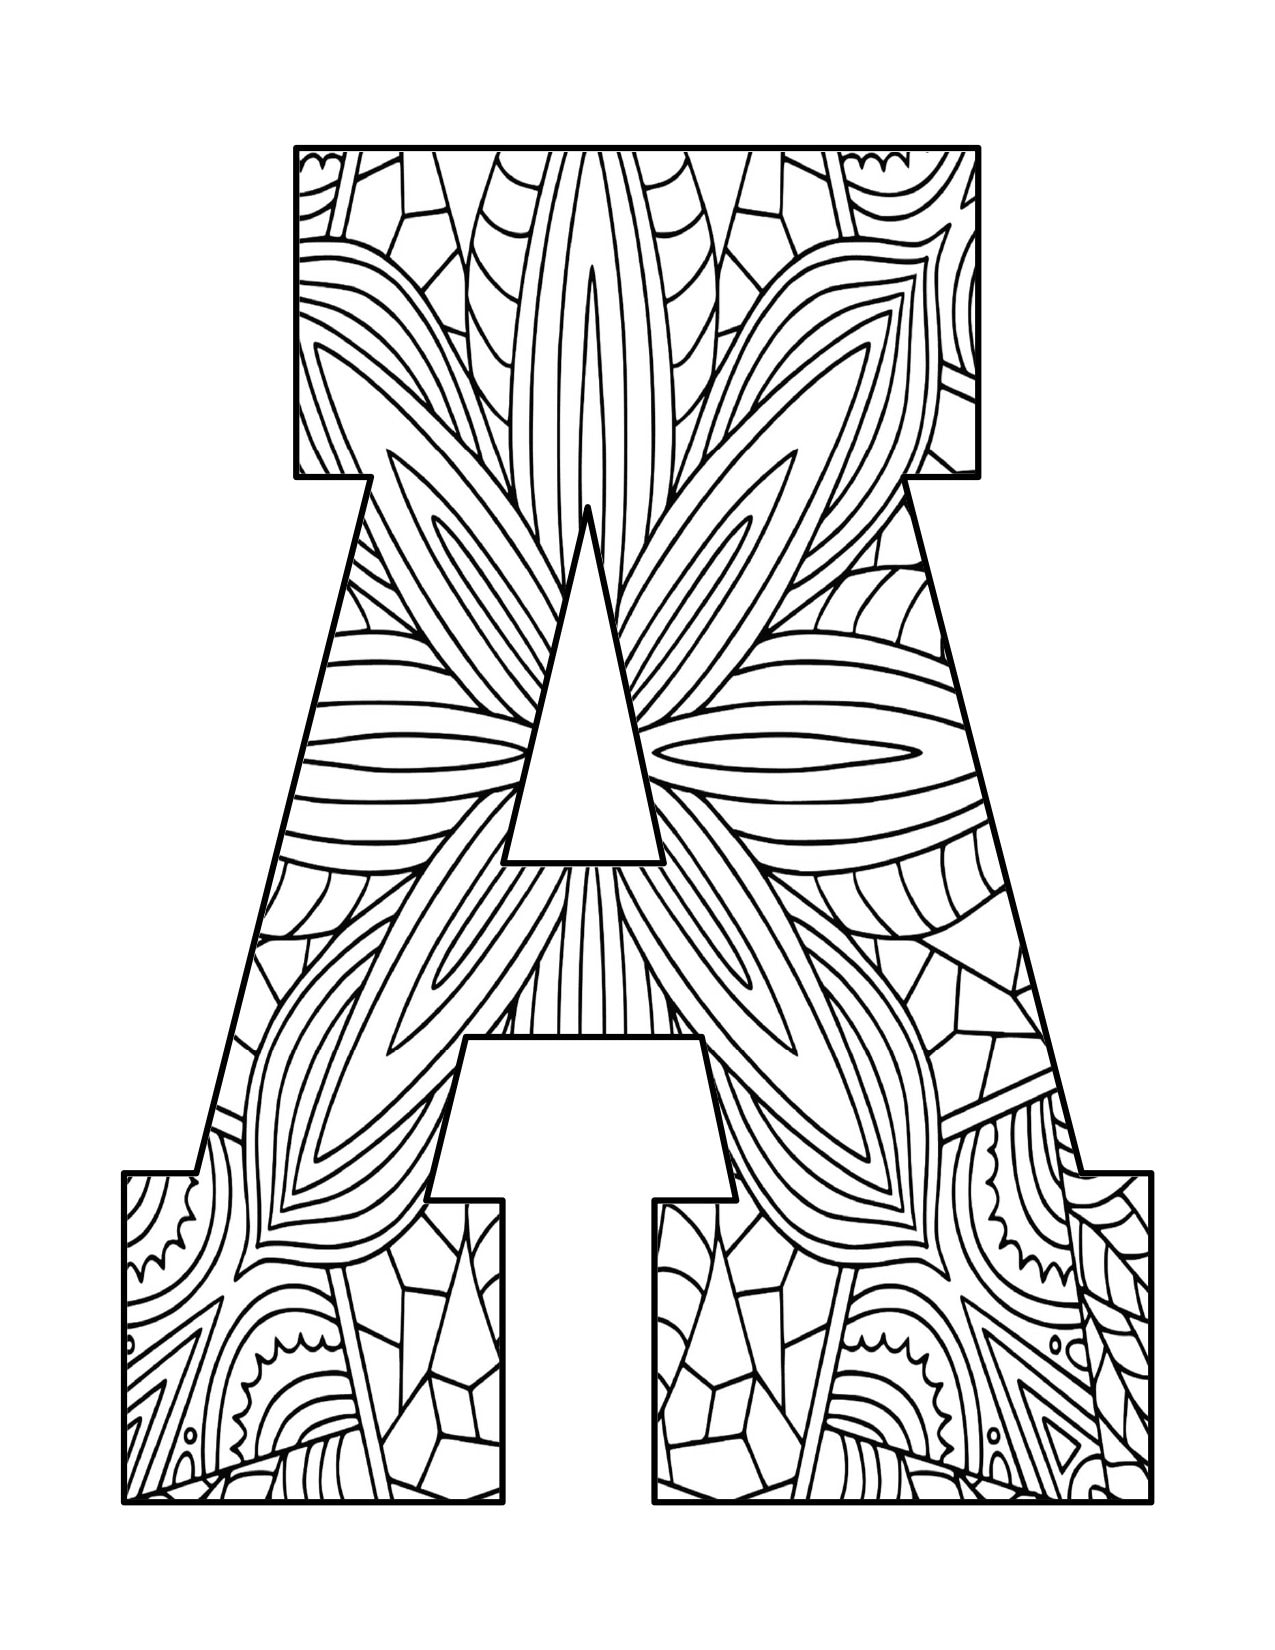 Mandala Alphabet Letters Coloring Pages. - Etsy Canada